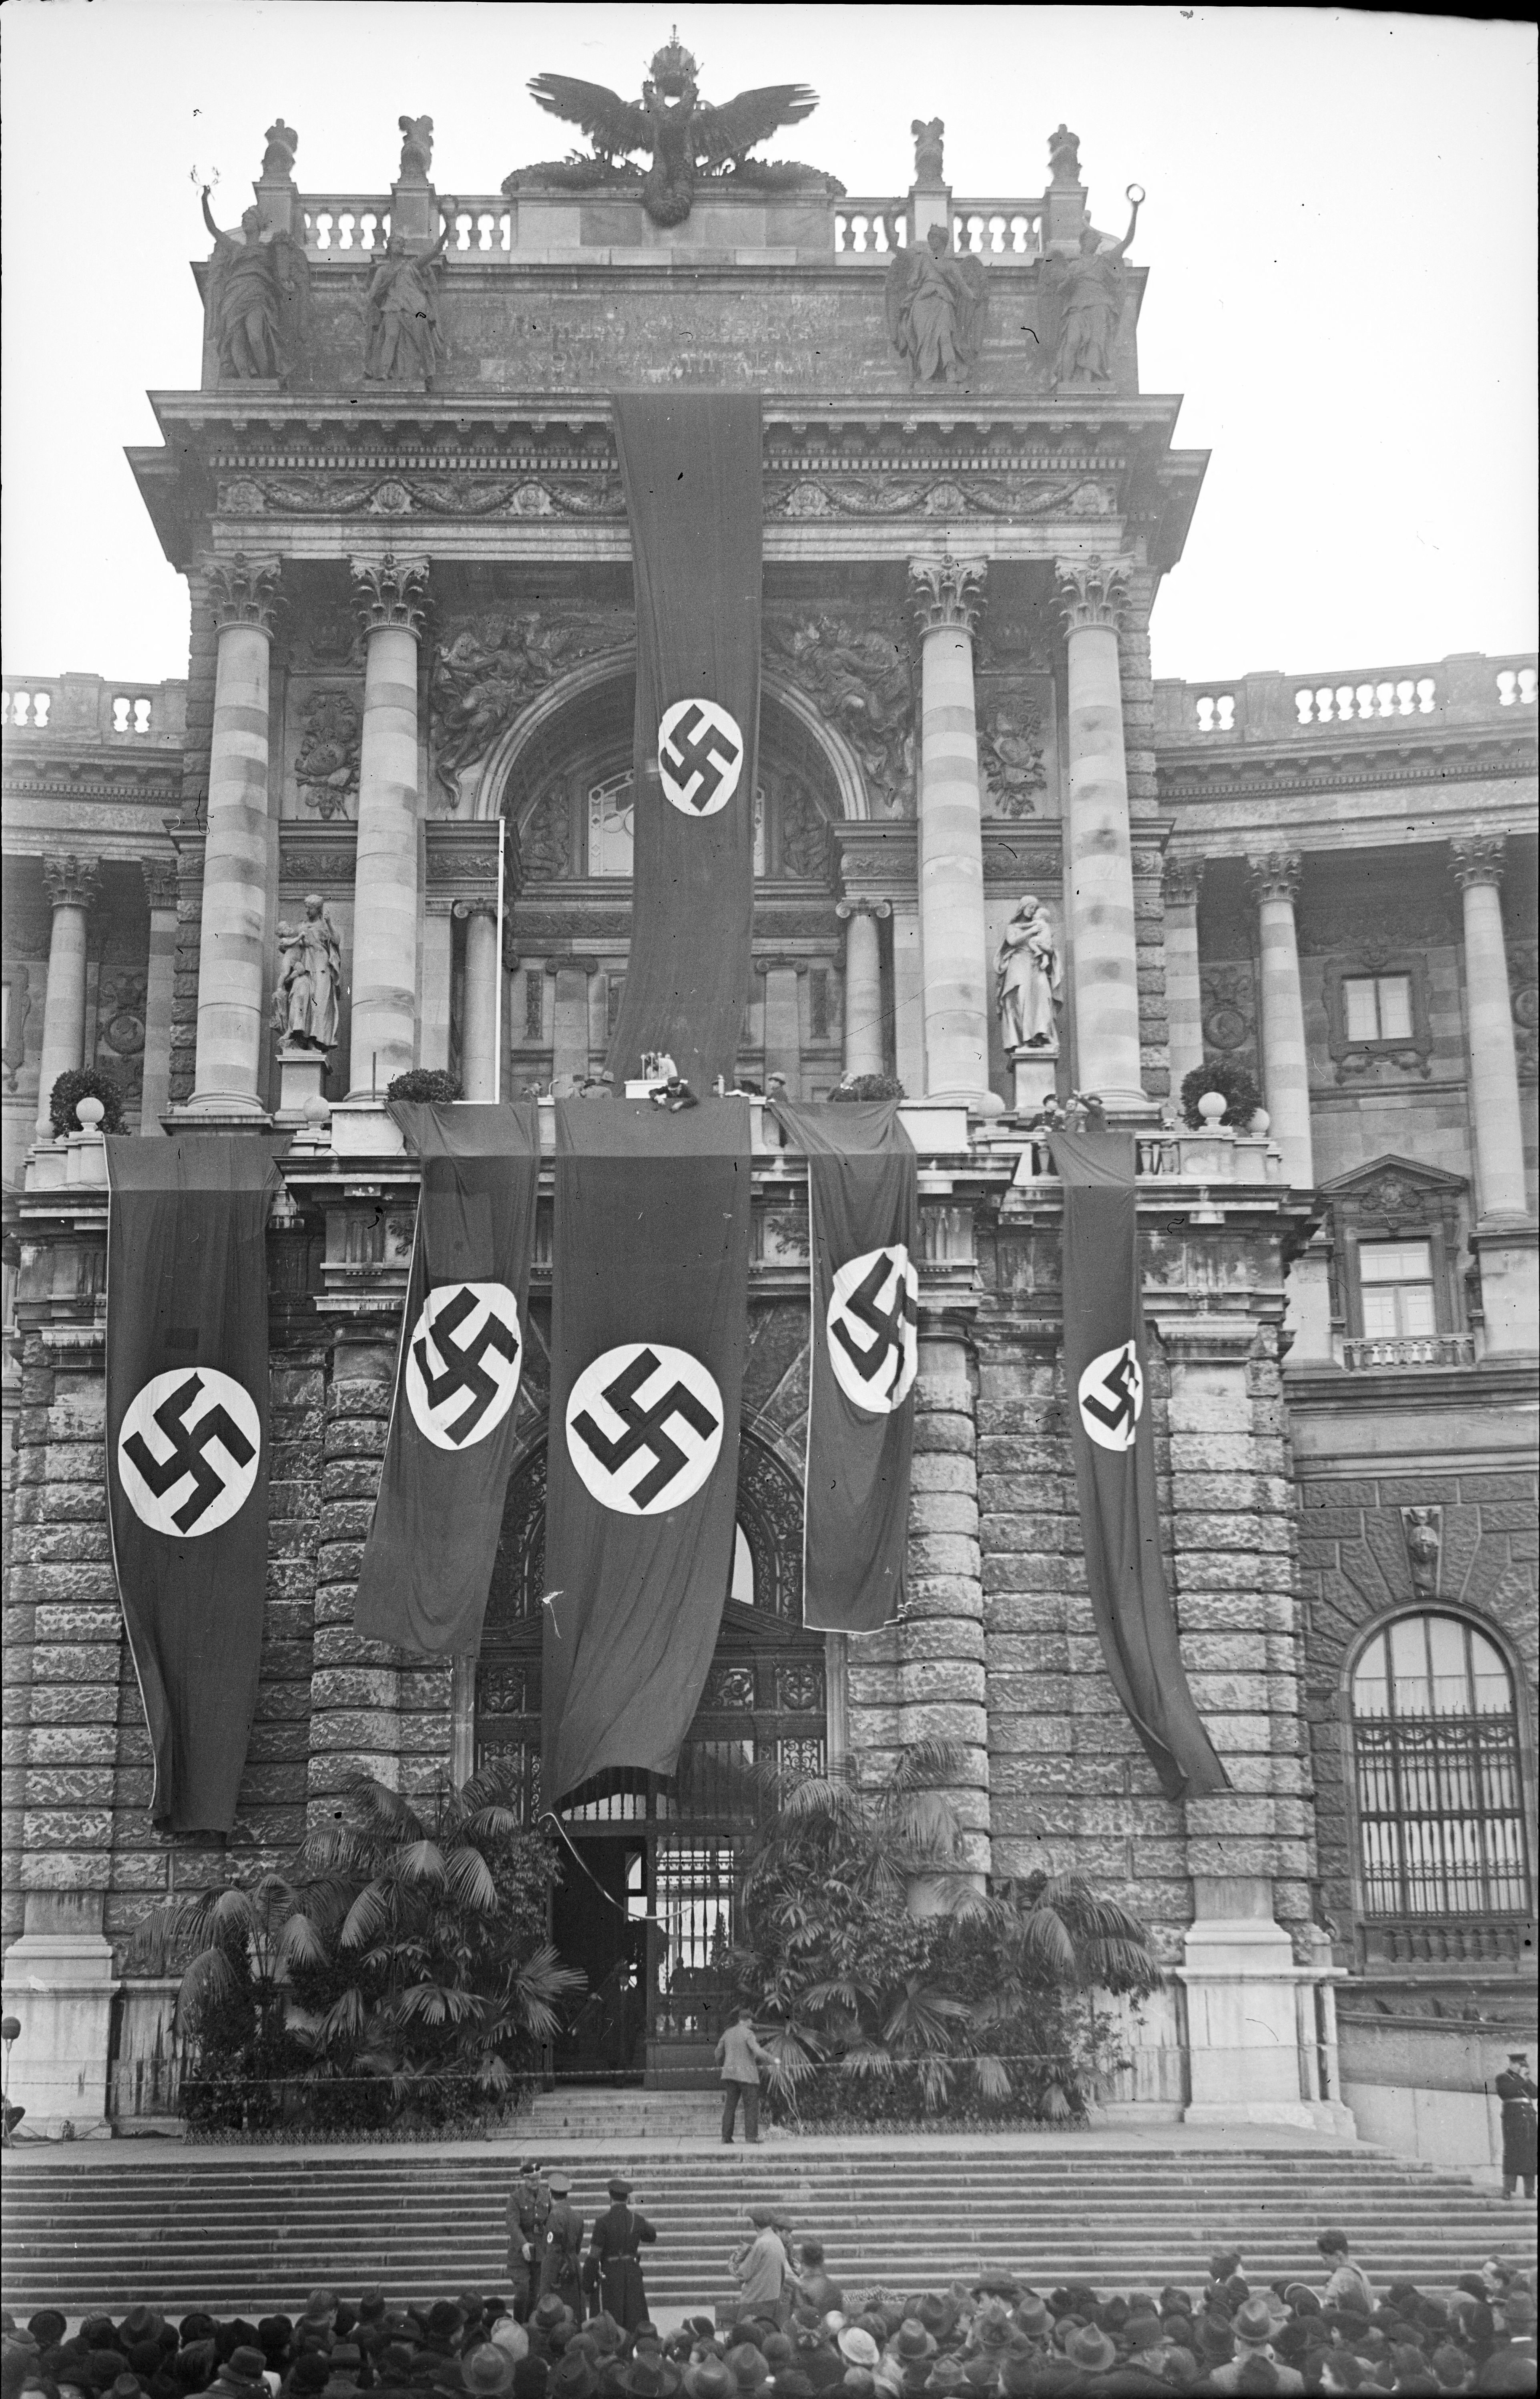 This photo taken on March 15, 1938 shows people gathering prior to a speech by Adolf Hitler, which he delivered from the balcony, after the Nazis annexed his homeland Austria. /Herbert Glockler/APA/Austrian National Library/AFP